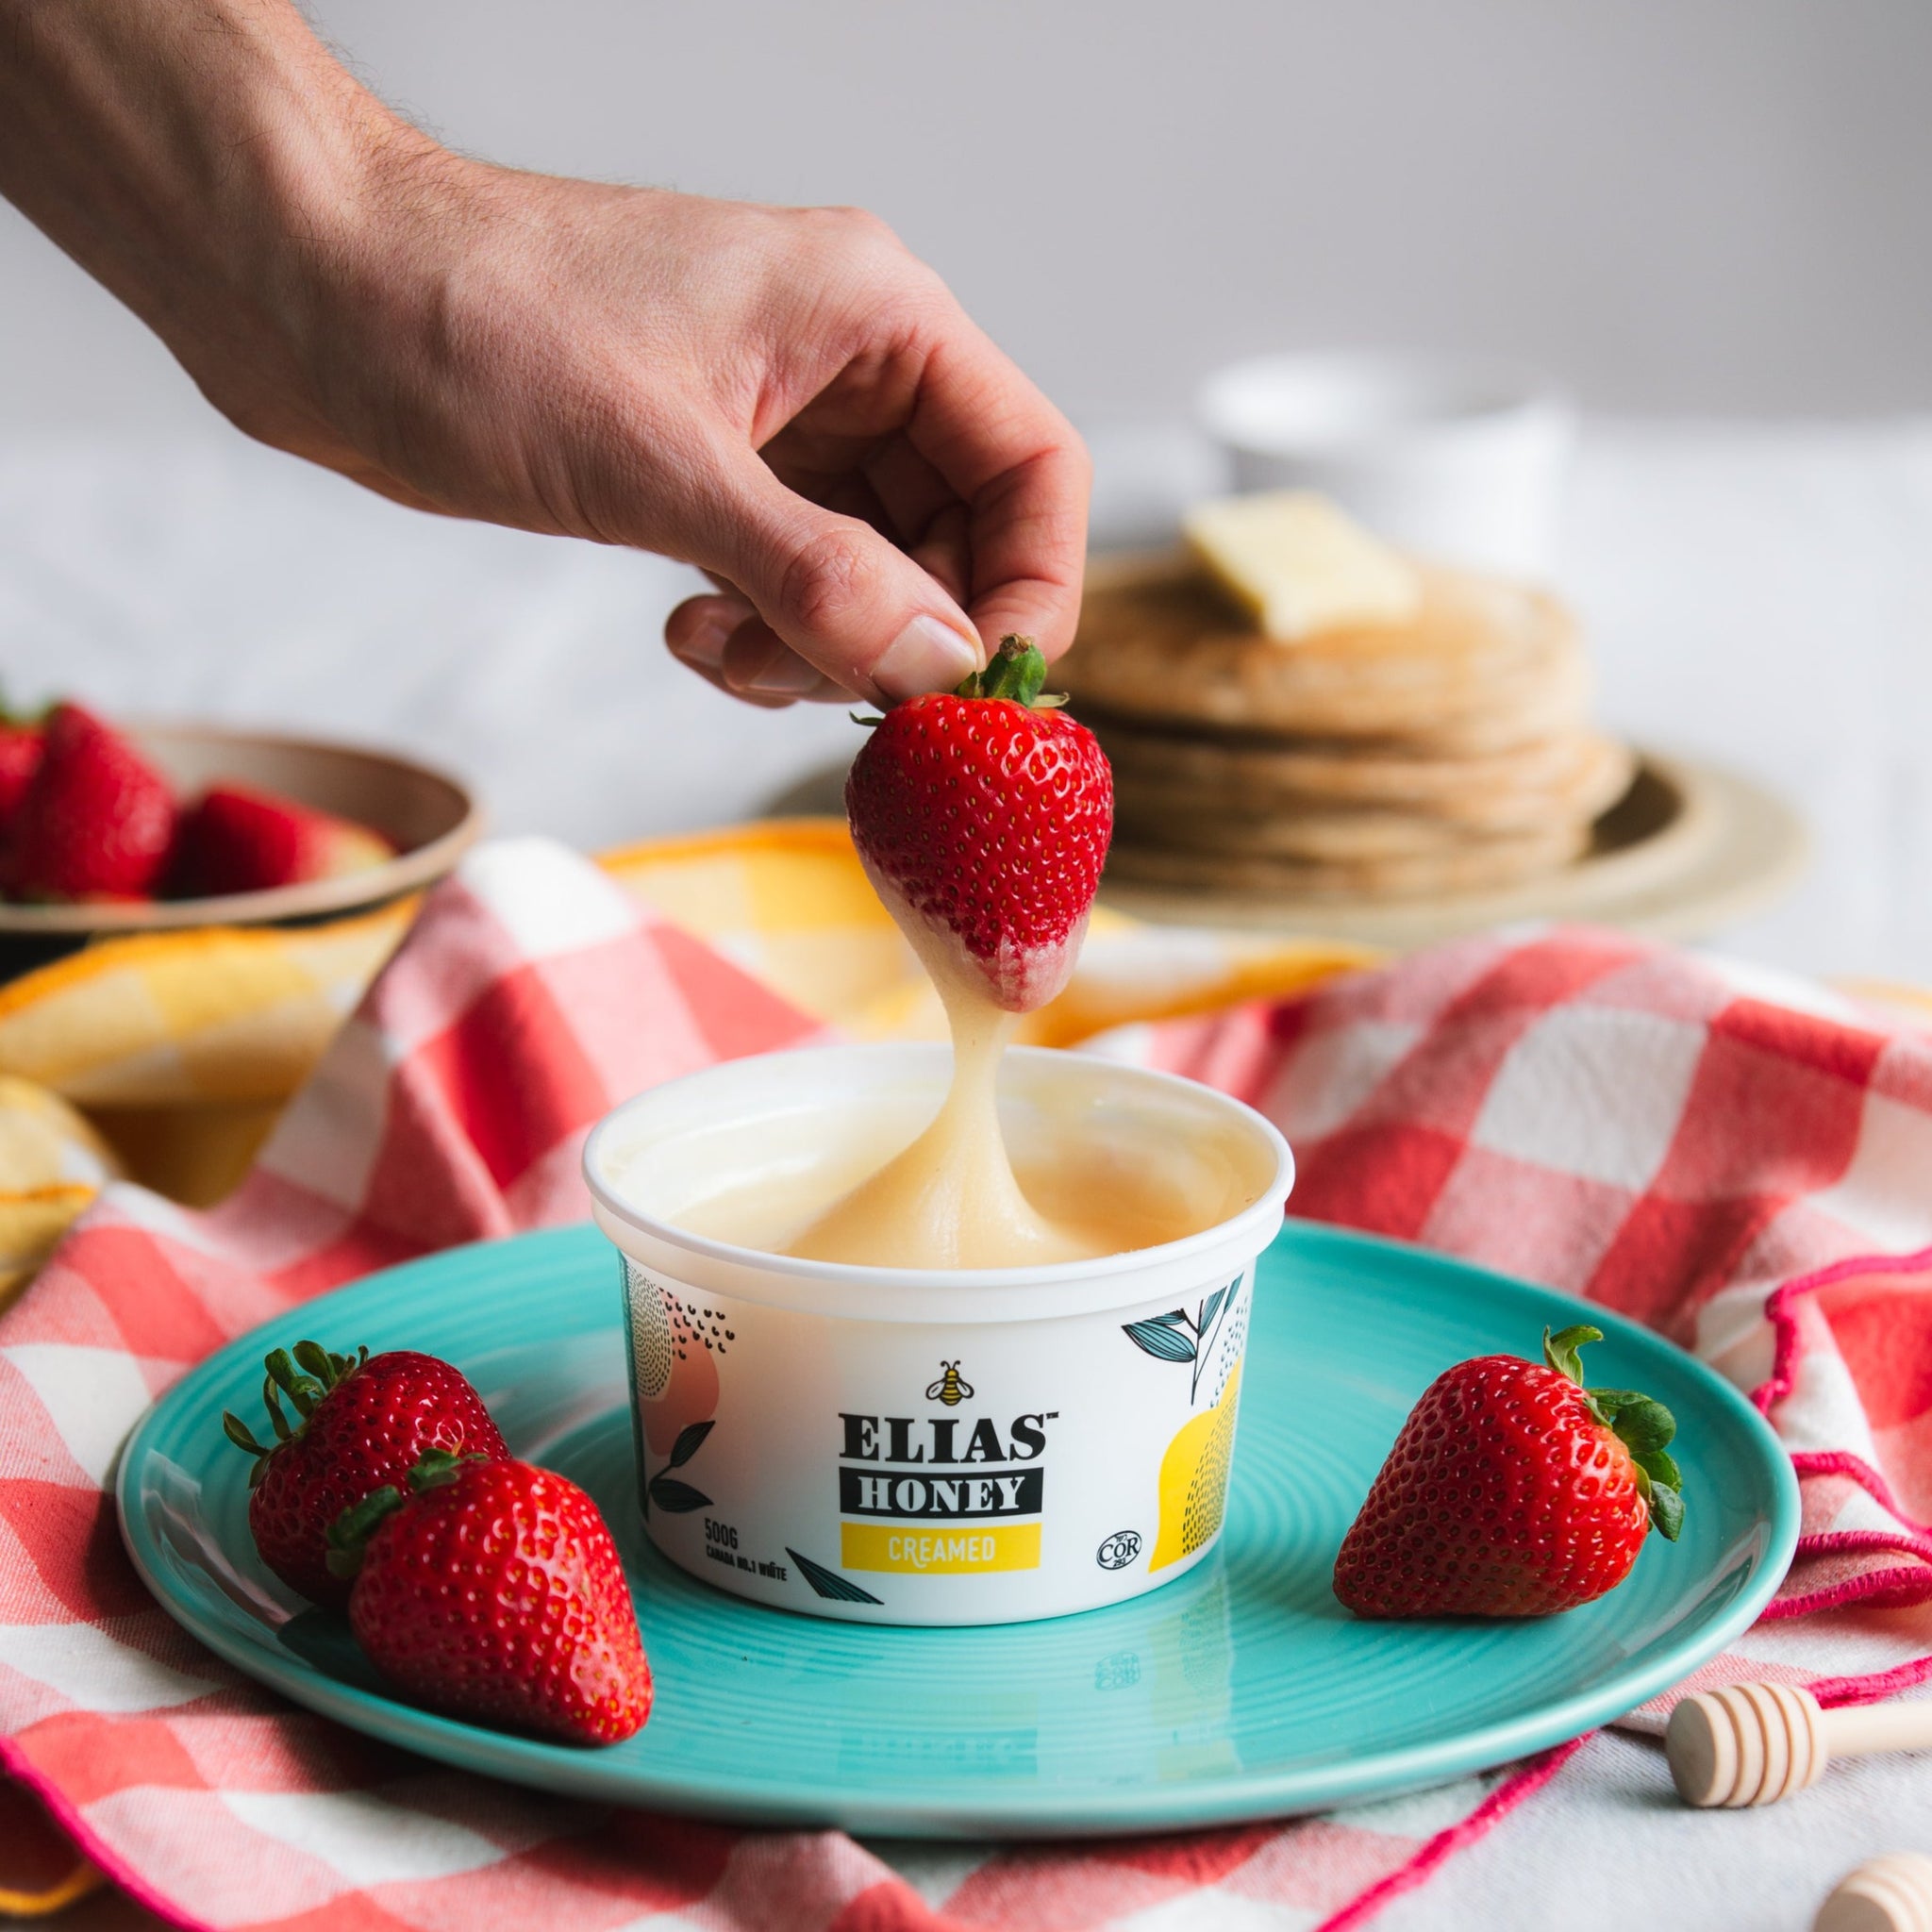 A hand dipping a strawberry in a Elias Honey Creamed 500gr tub